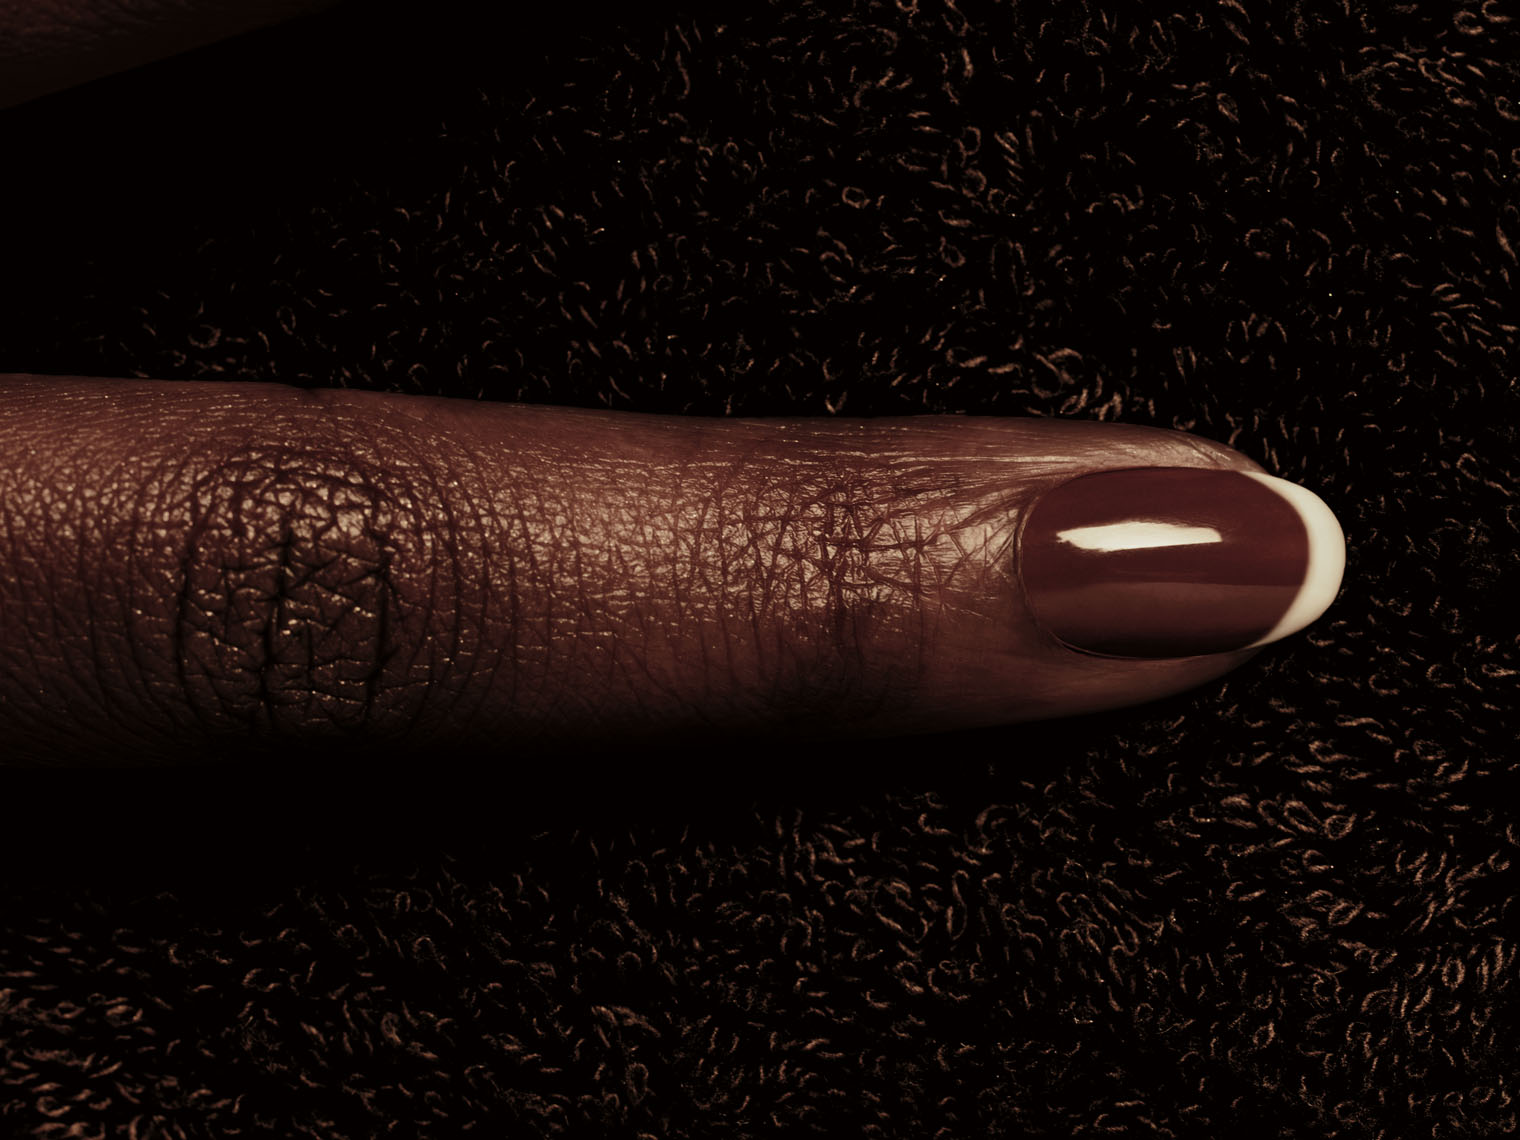 Black female finger with a French manicure.